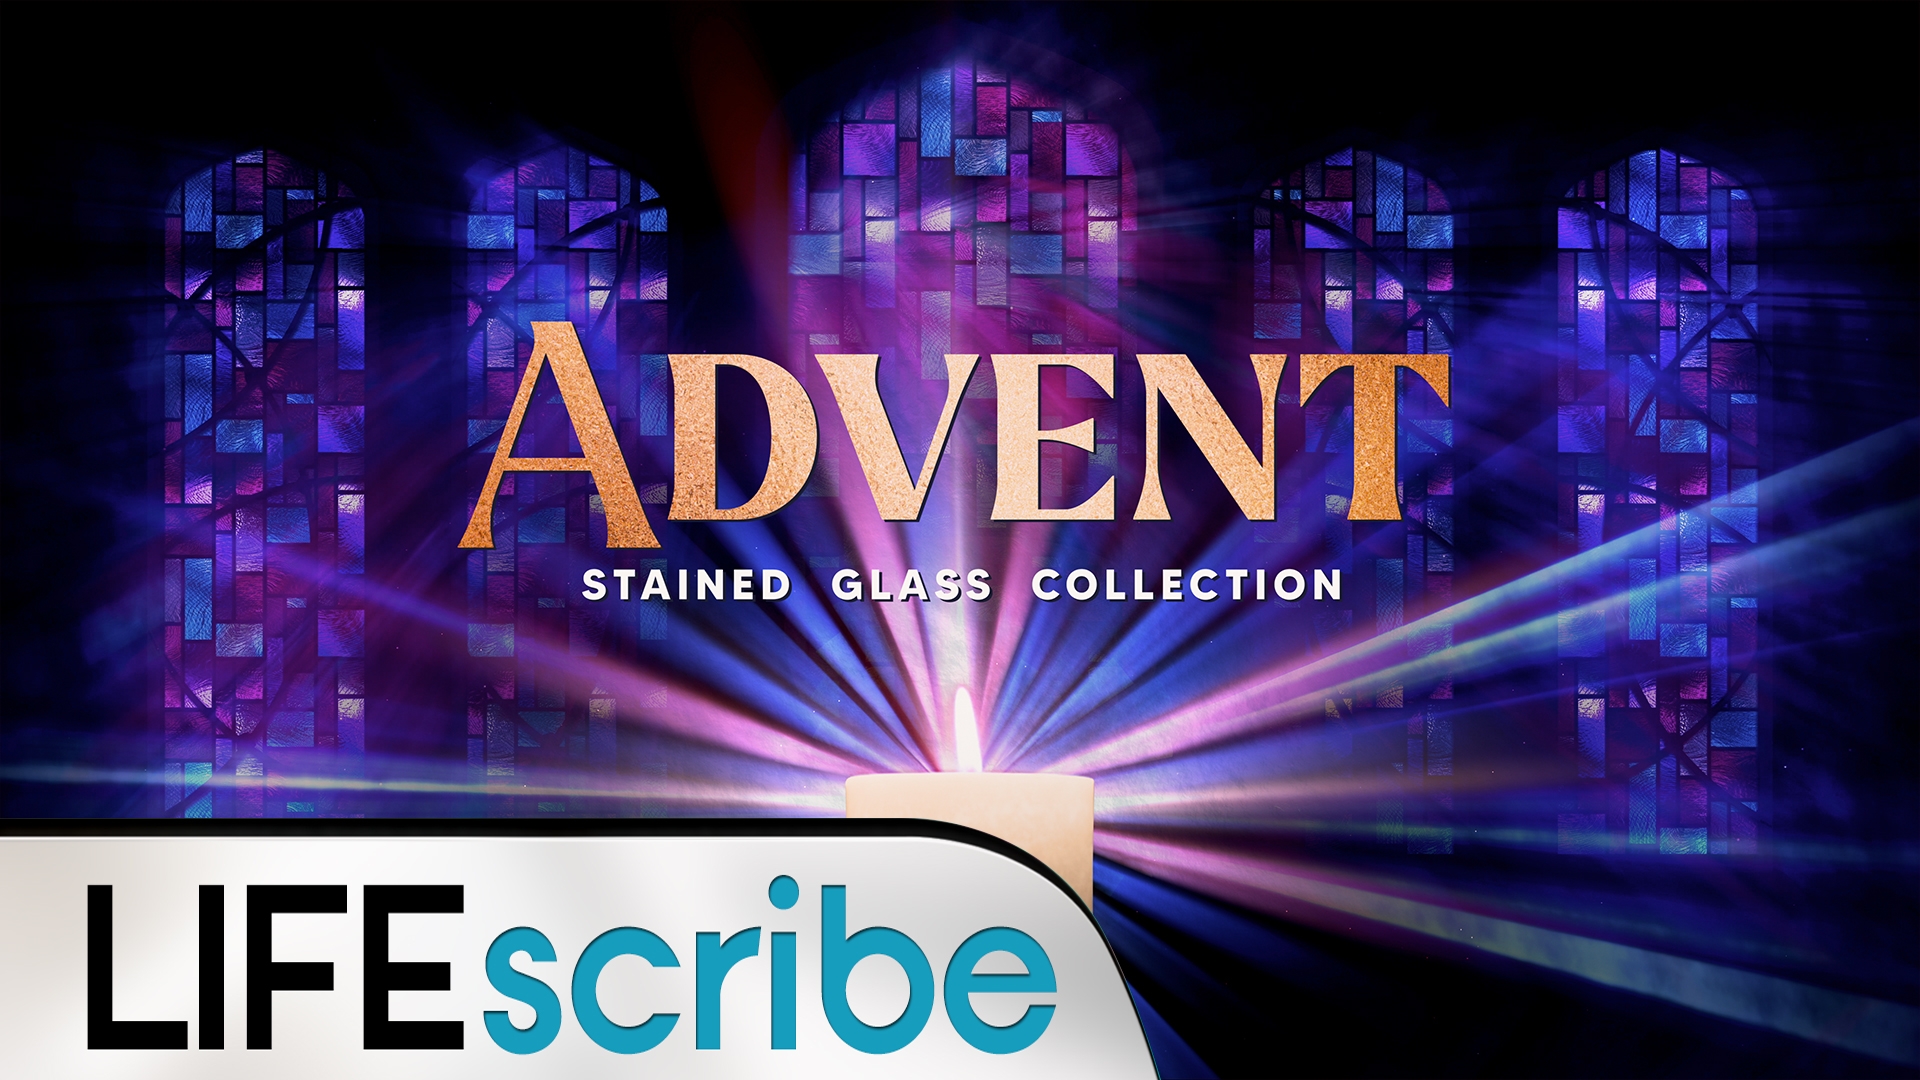 Advent Stained Glass Collection